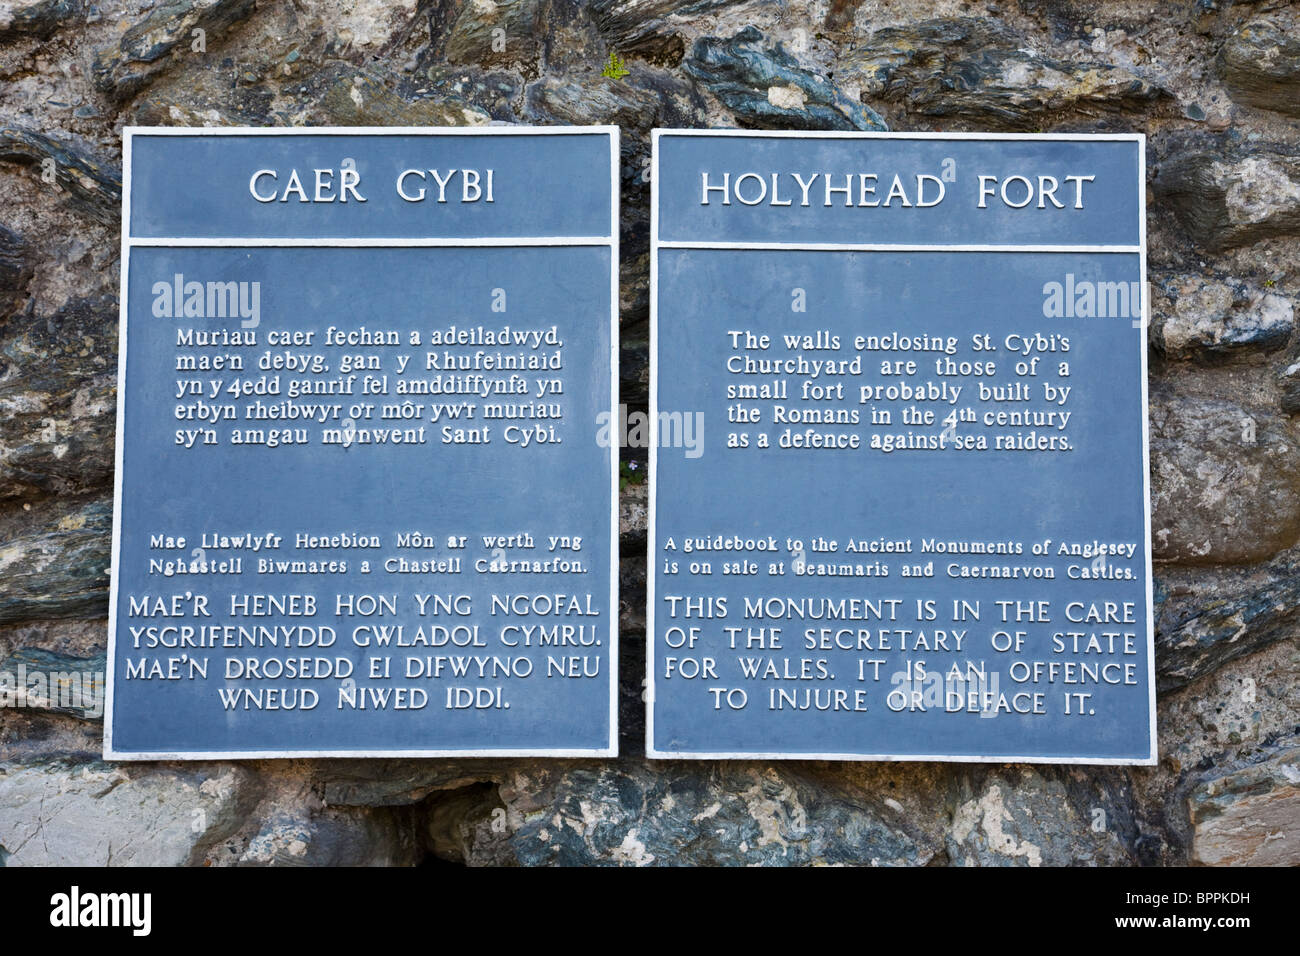 Holyhead, Isle of Anglesey, North Wales, UK. Information plaque outside Caer Gybi Roman fort walls Stock Photo